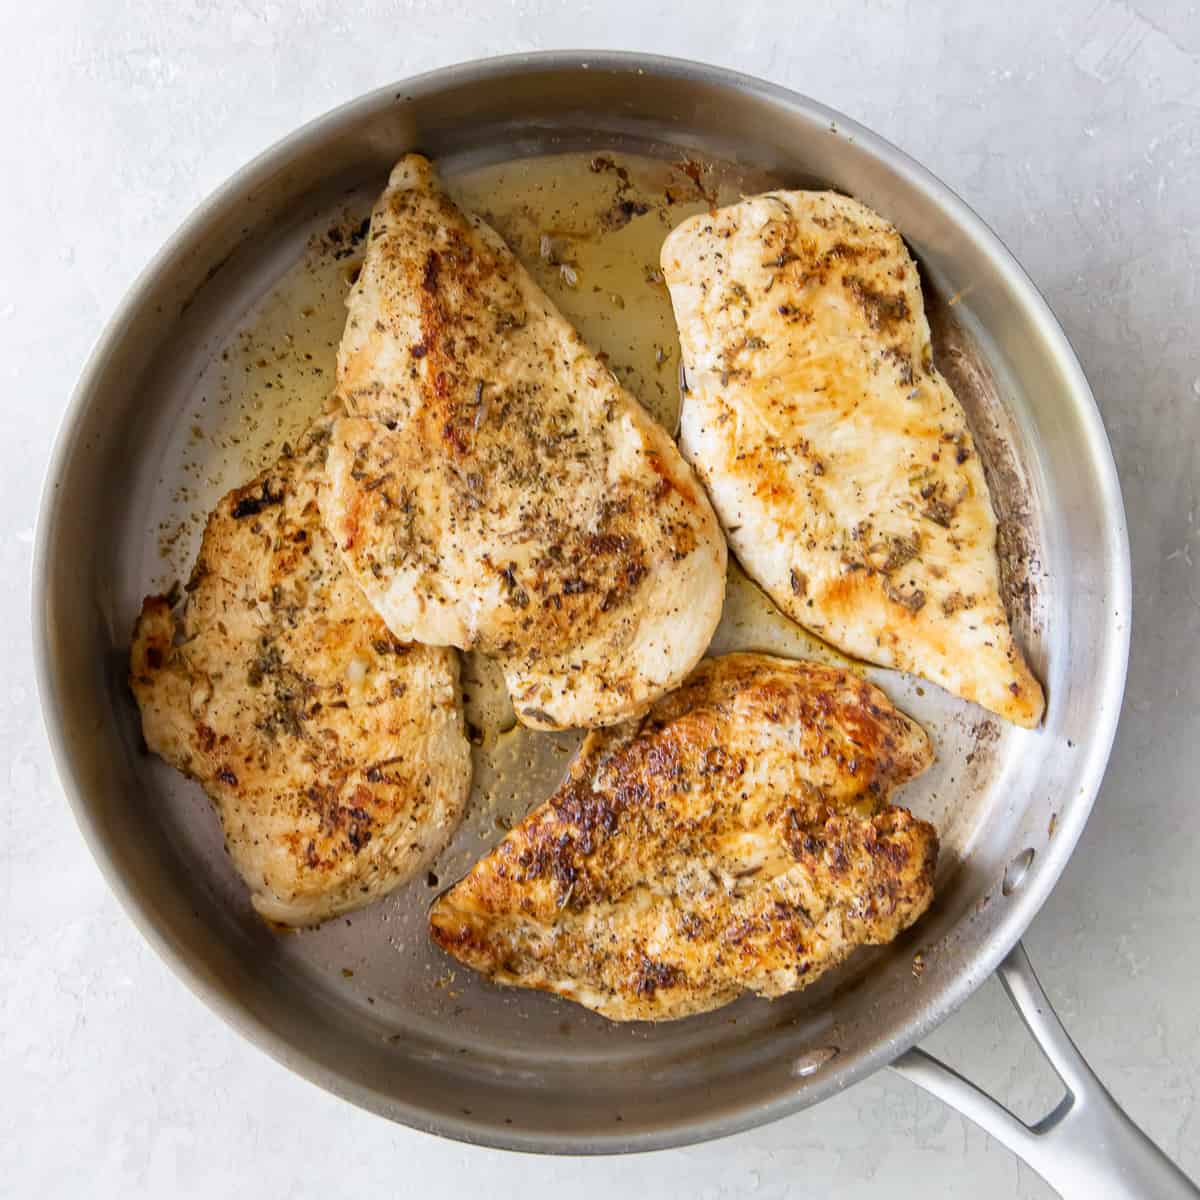 Seasoned chicken breasts cooking in a skillet.